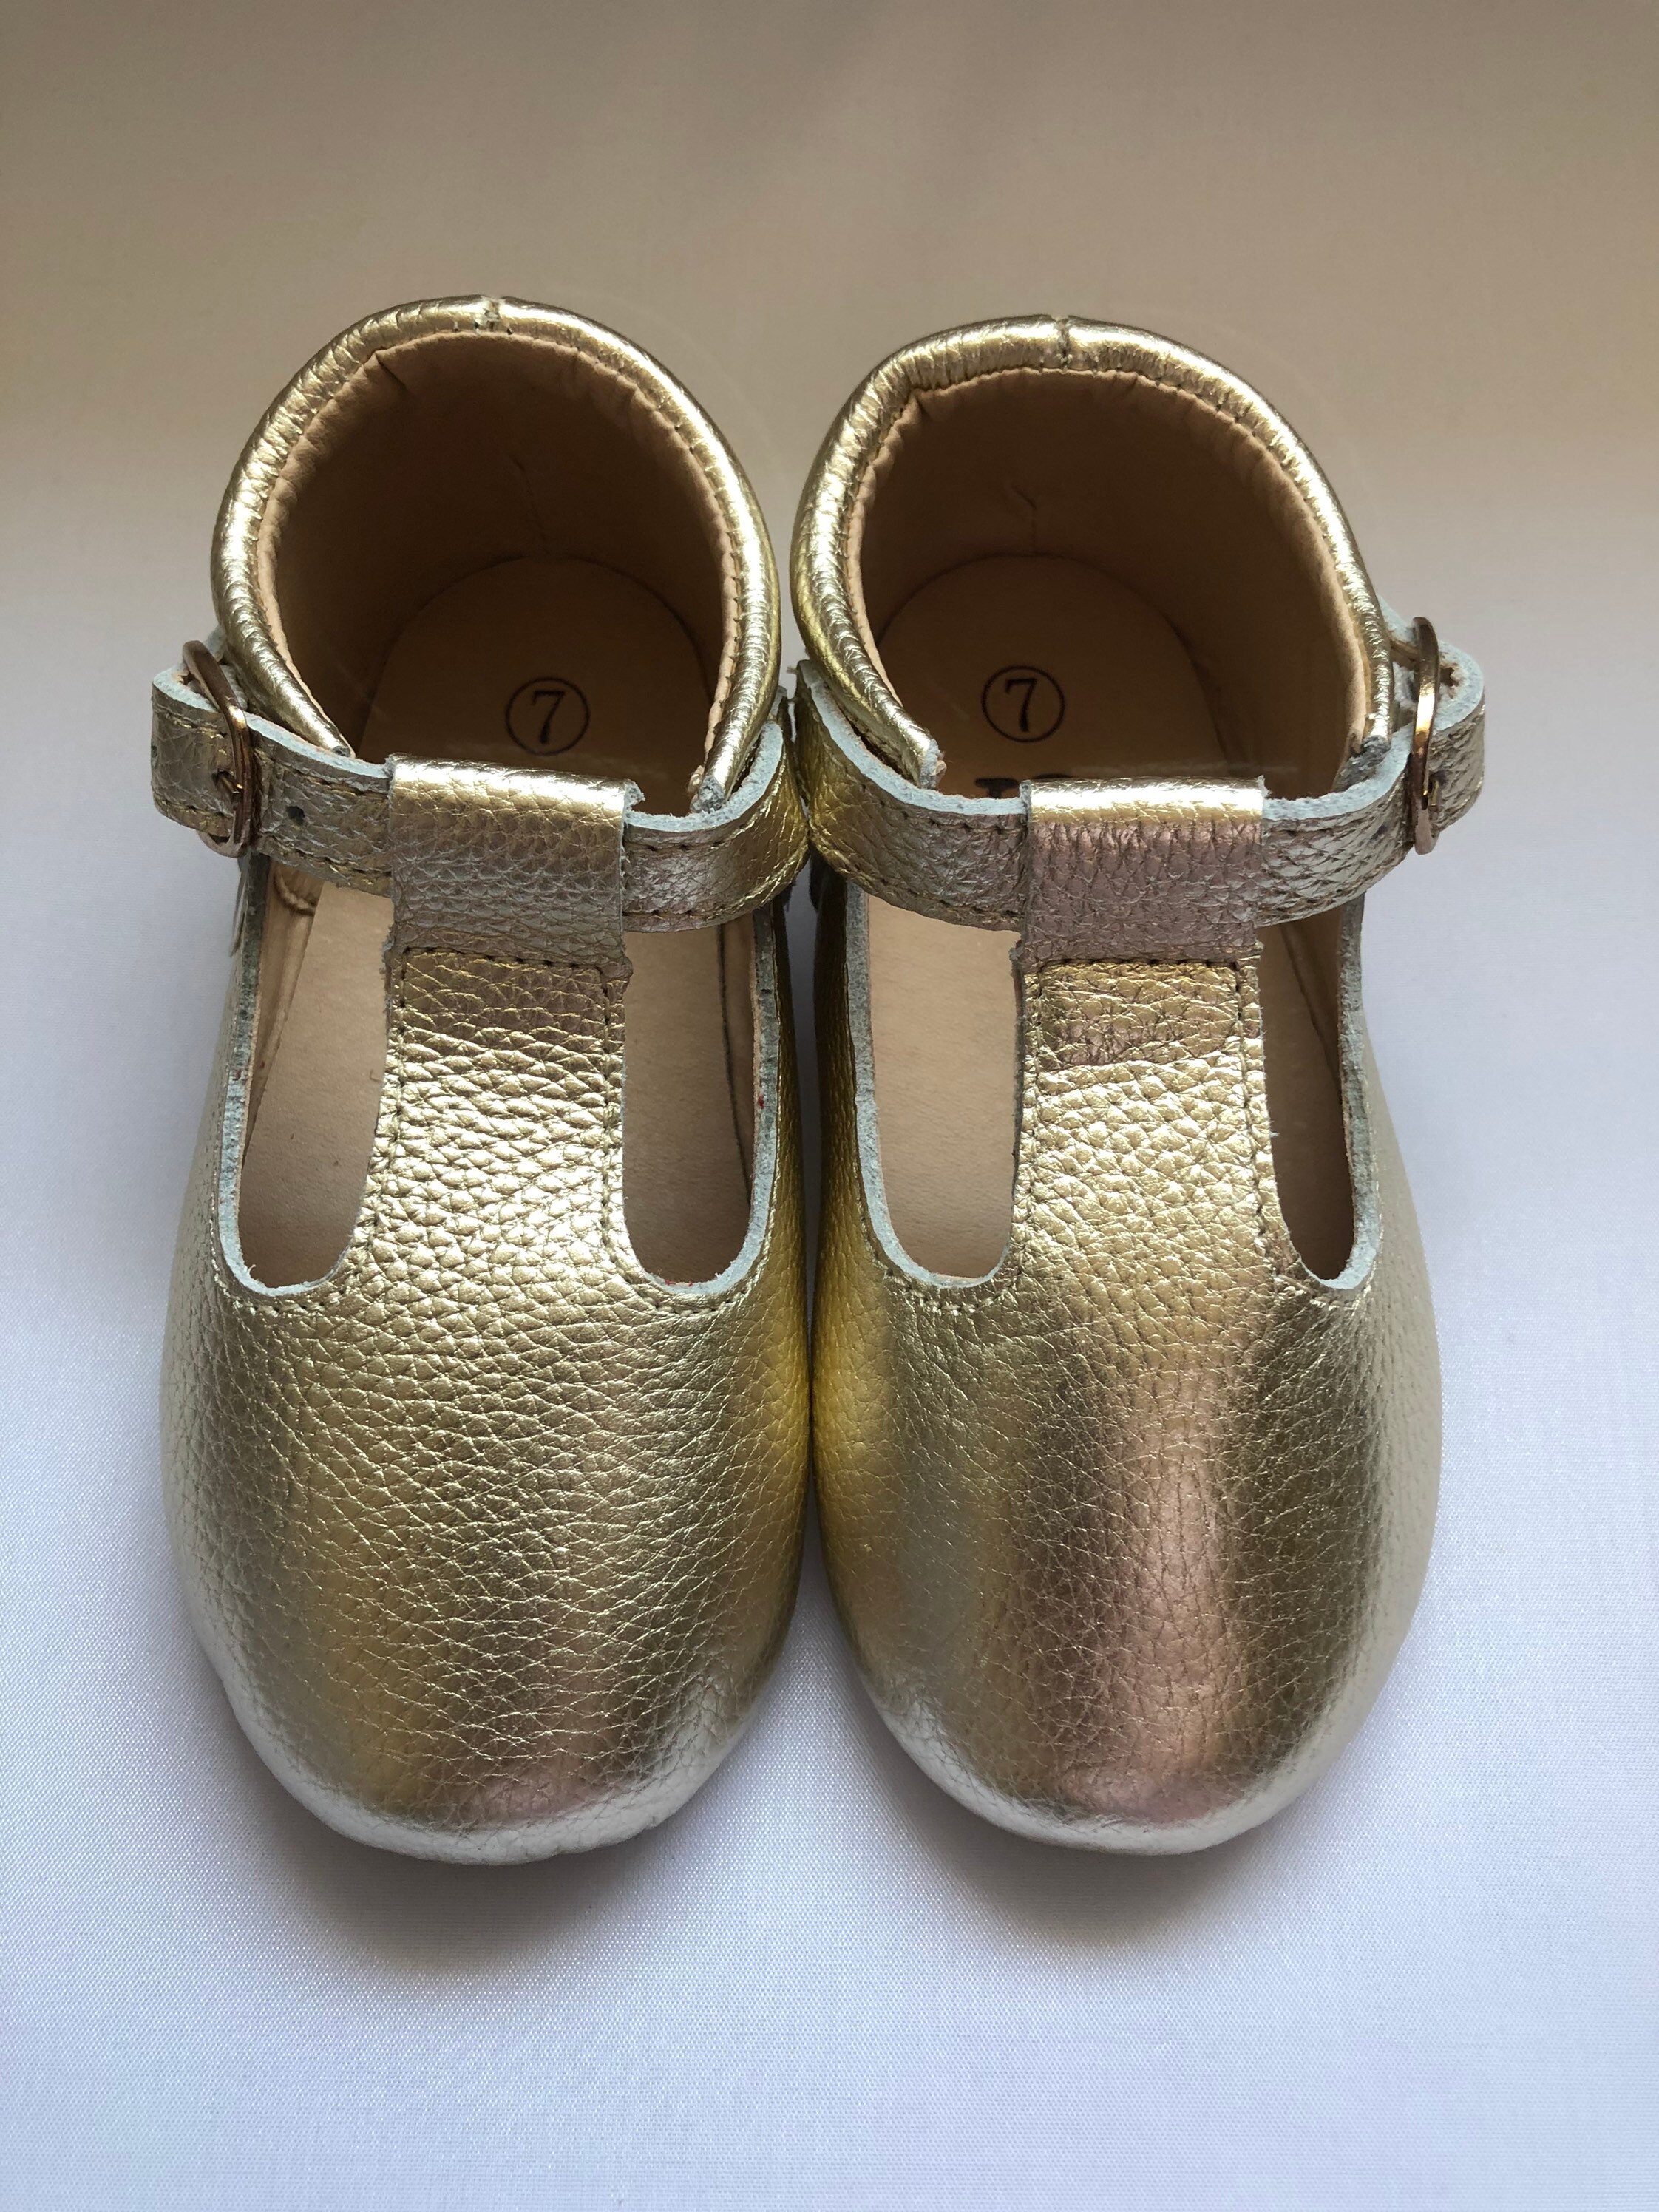 Special Sale! SIZE 7 Hard-Sole Mary Janes - Gold, Toddler Tbar Shoes ...